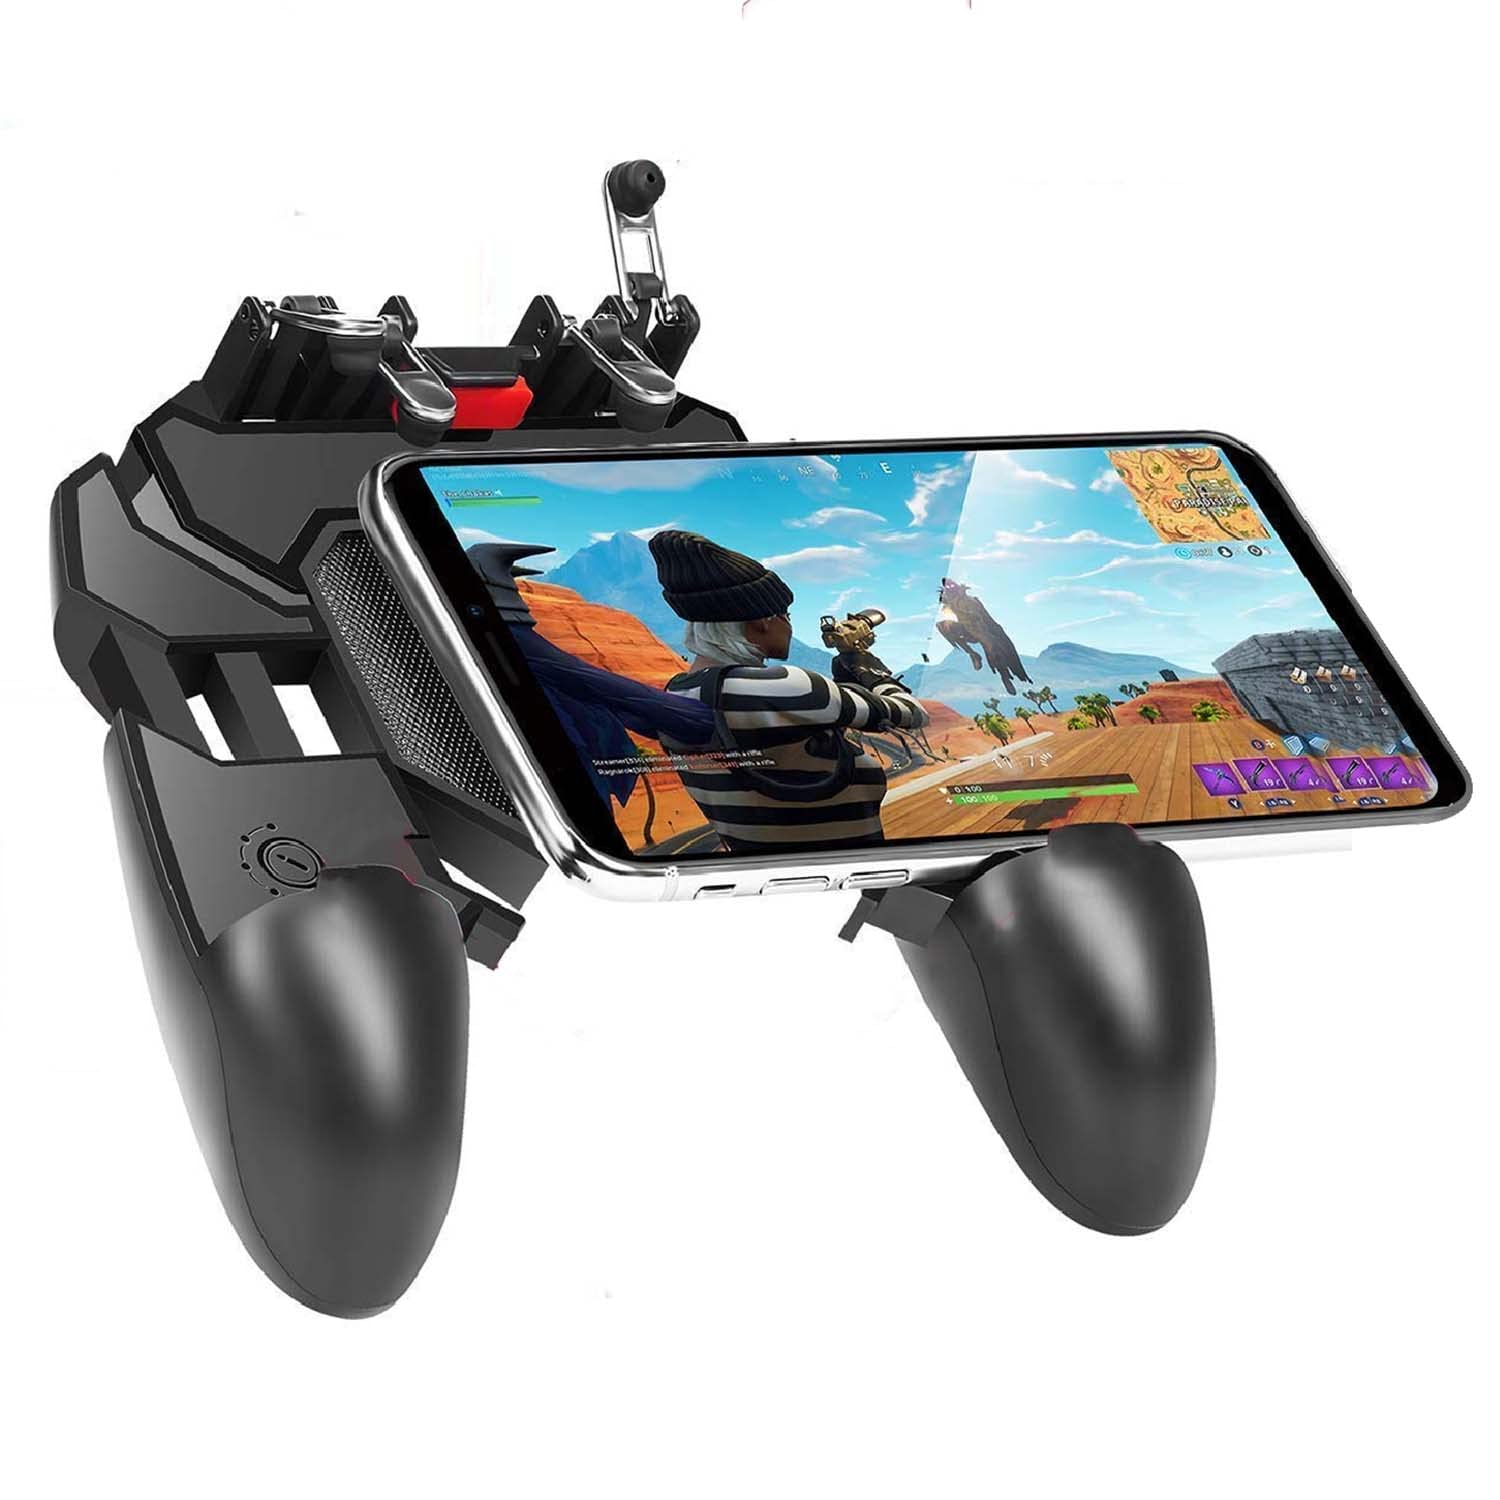 What Are The Best Mobile Gaming Triggers To Buy